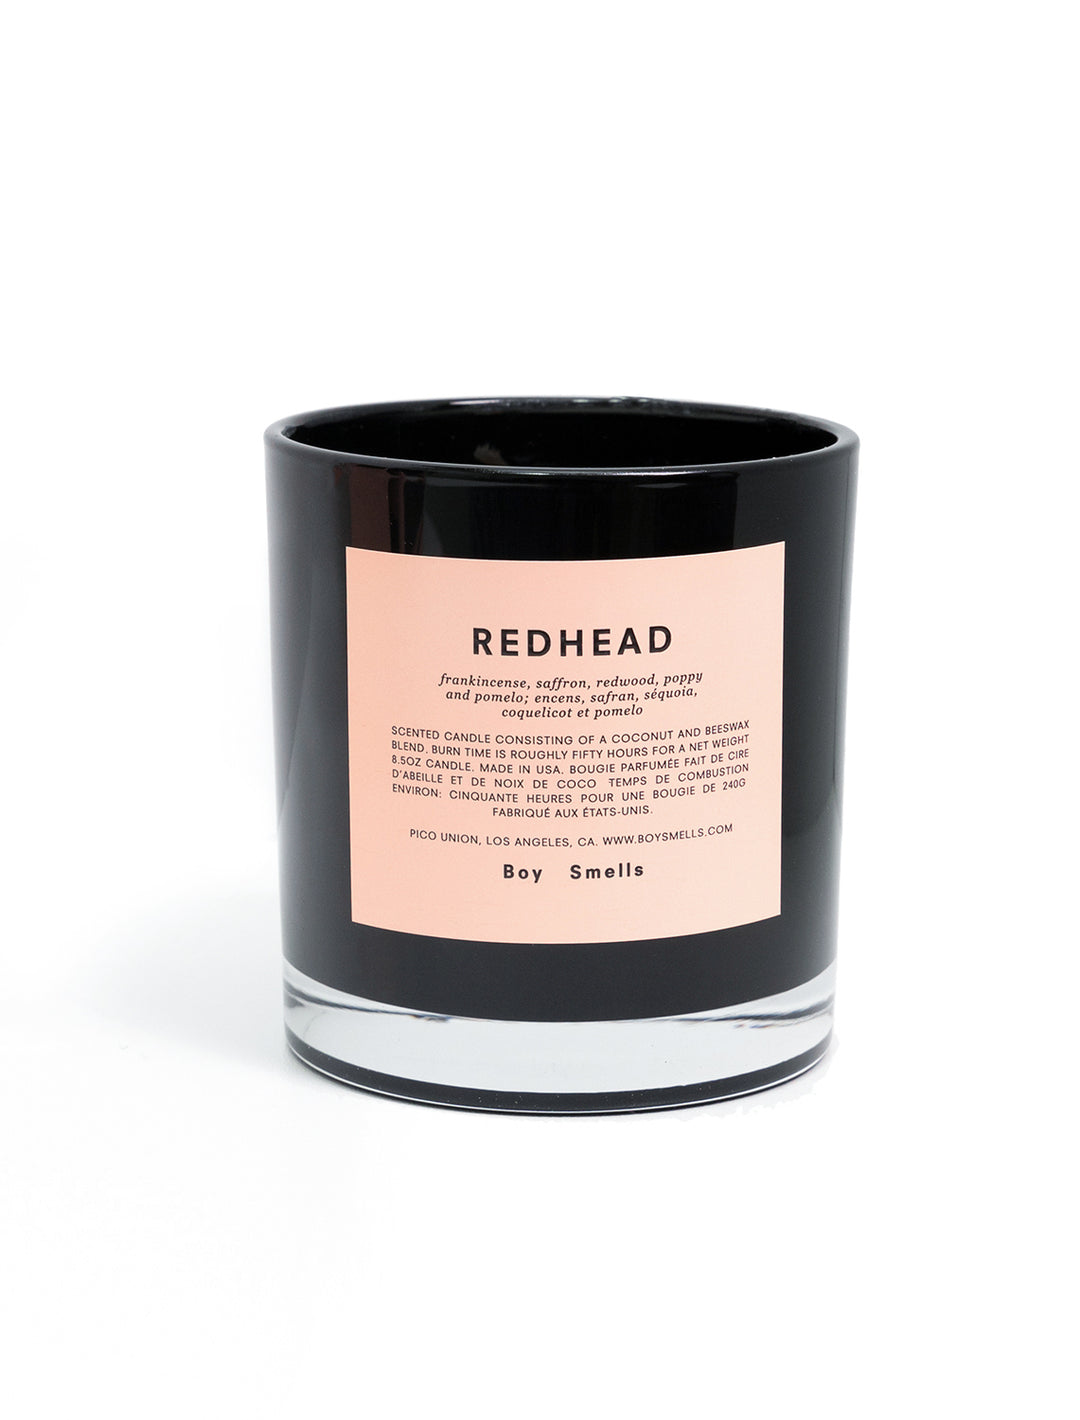 Front view of Boy Smells' Redhead candle.